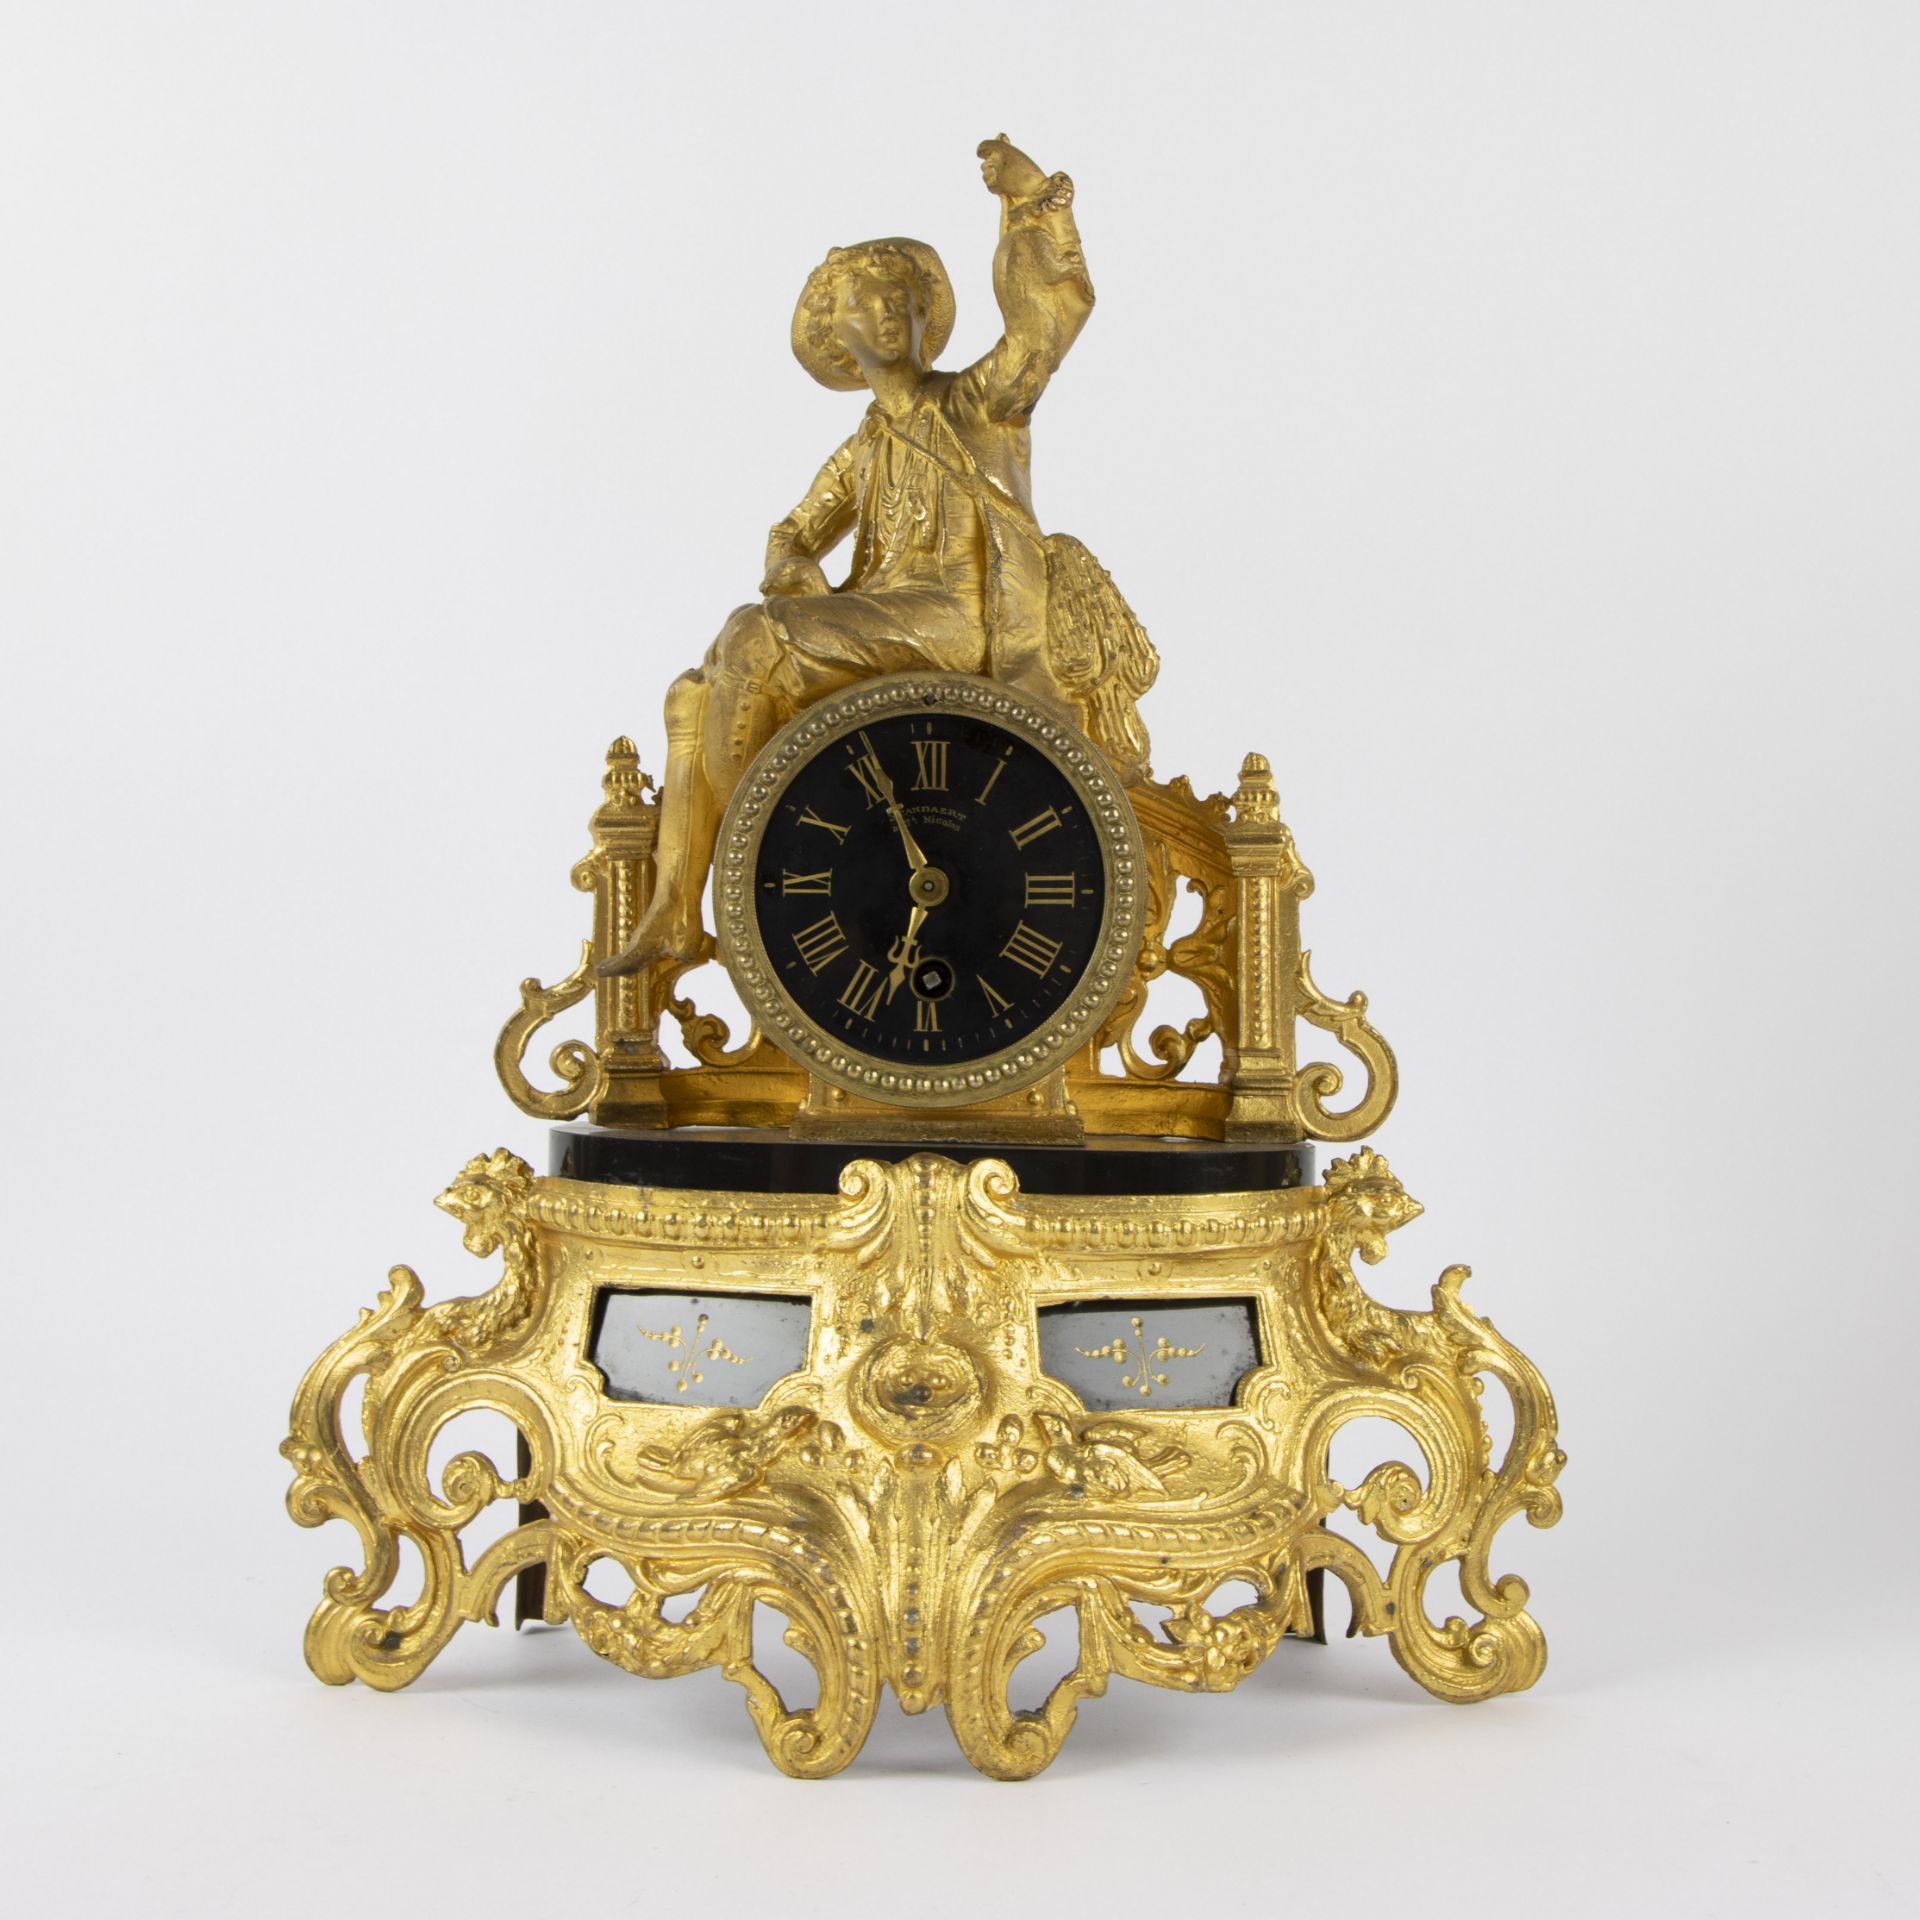 French gold-plated romantic mantel clock with enamel dial in a globe, 2nd half 19th century and Fren - Image 5 of 6